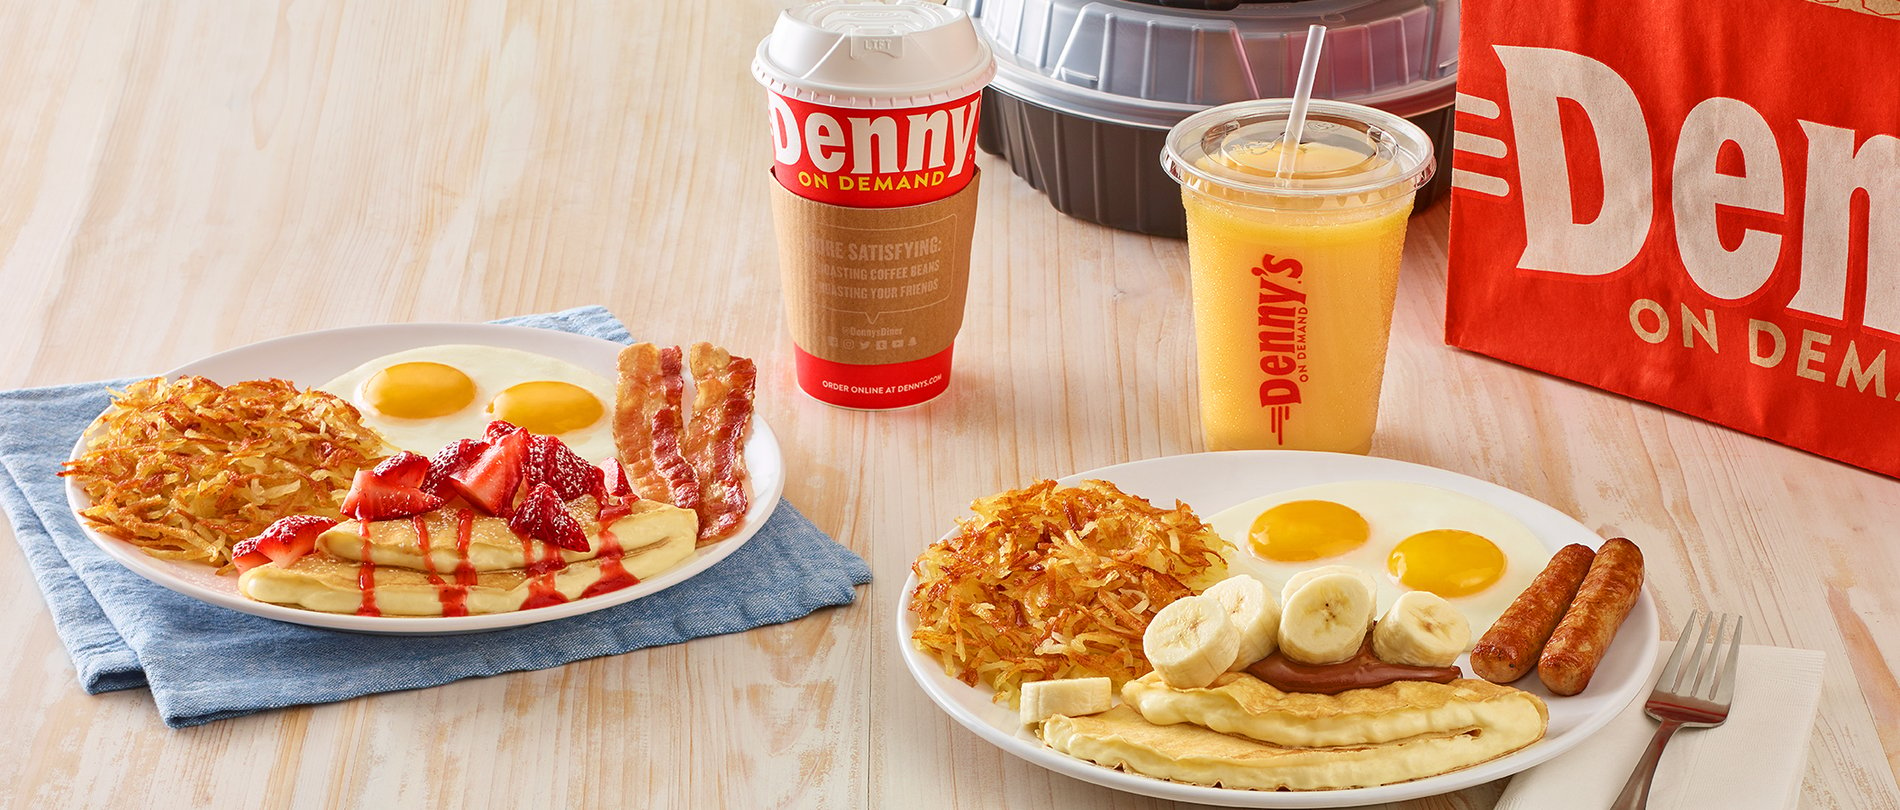 Denny's to open new location in North Las Vegas